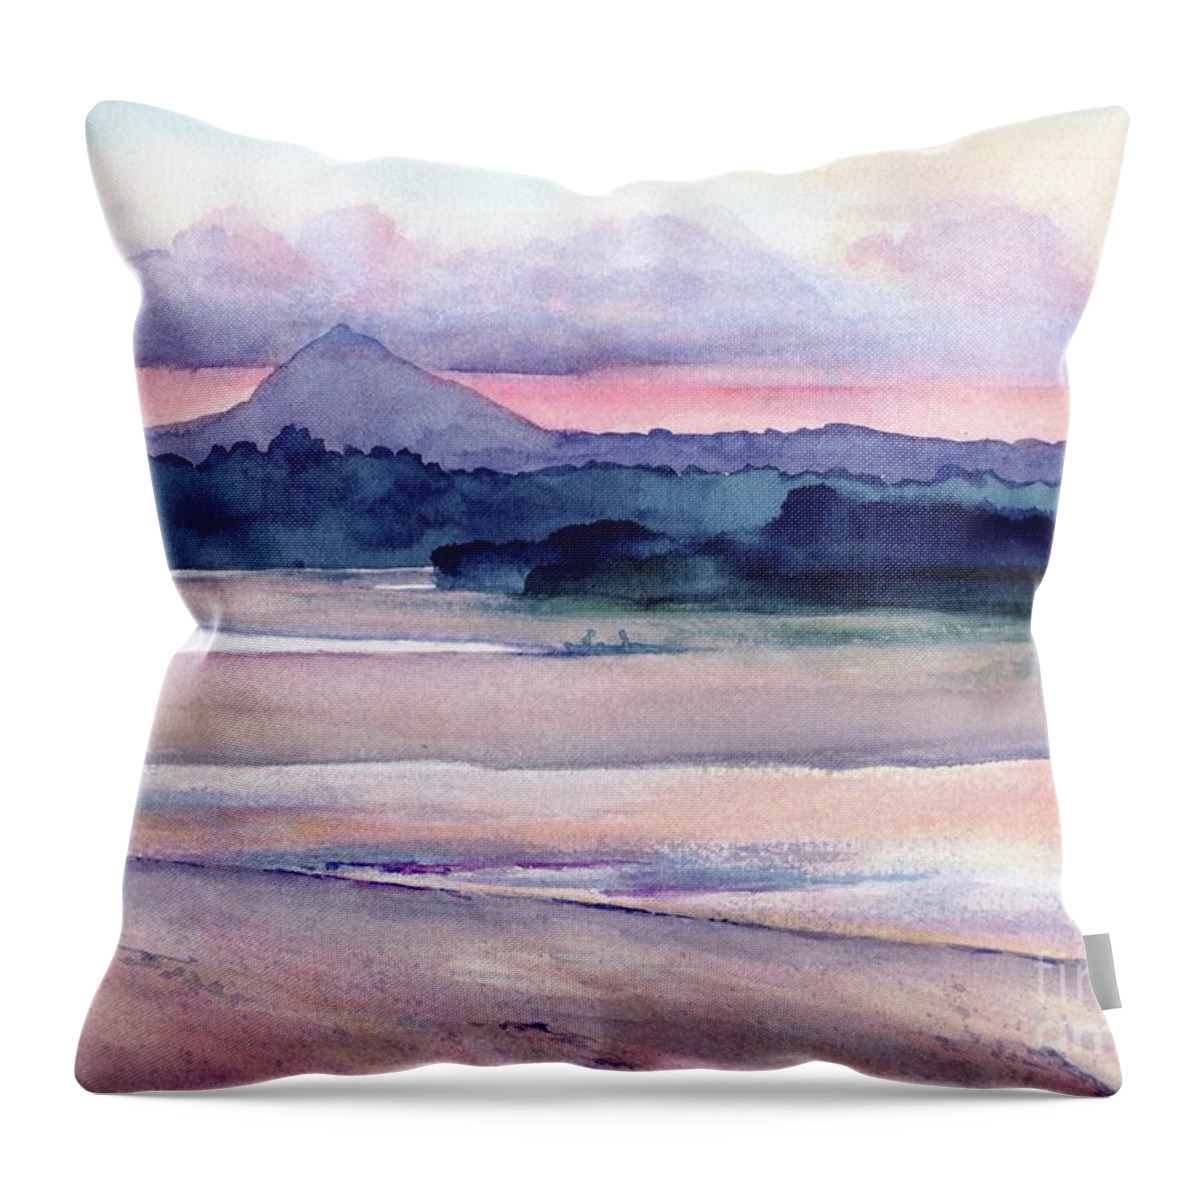 Sunset Painting Throw Pillow featuring the painting Noosa River Sunset by Chris Hobel